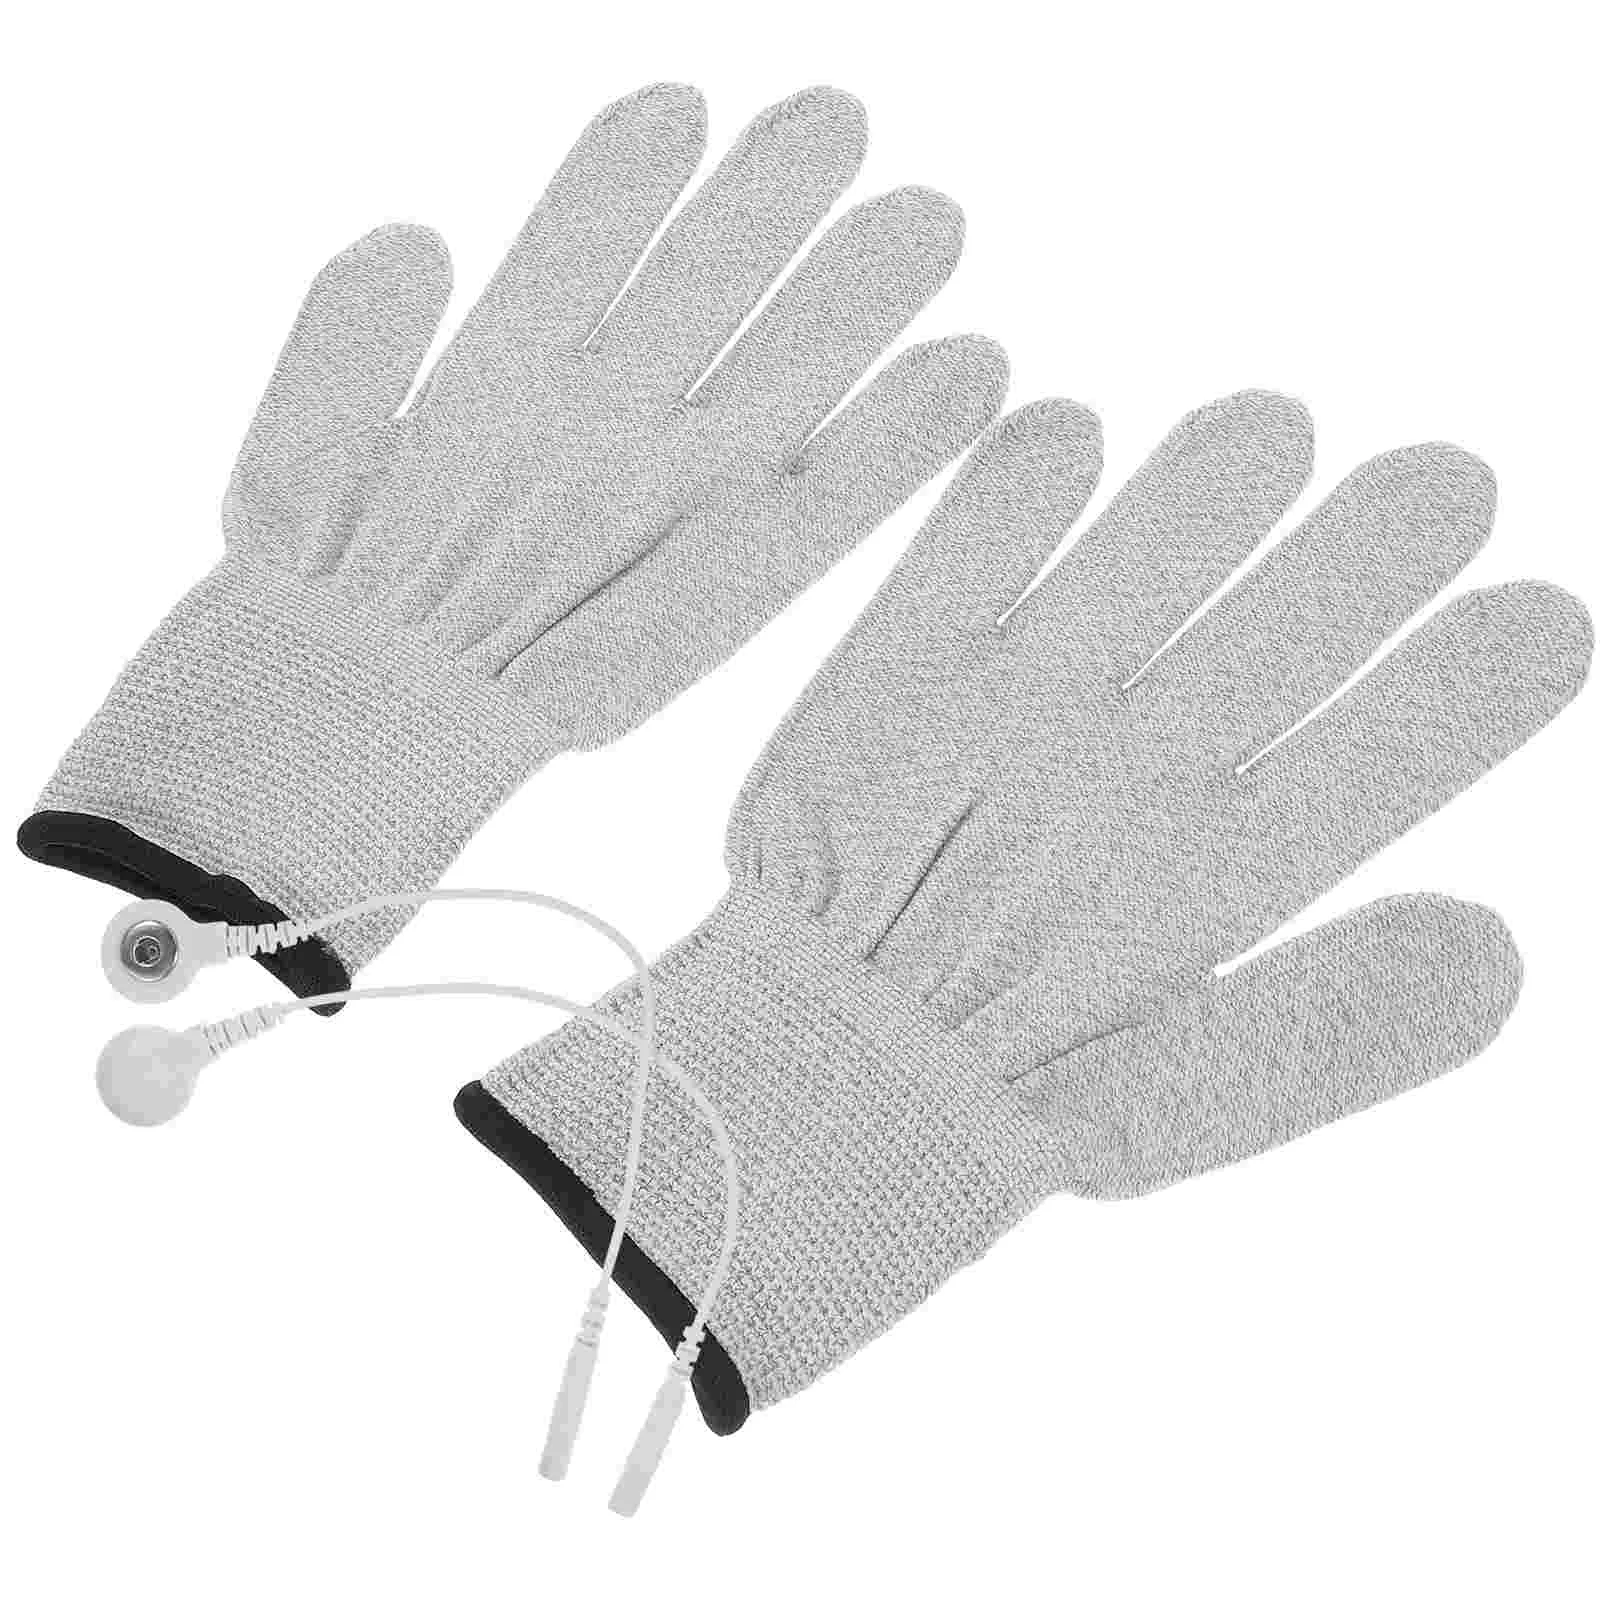 

1 Pair Practical Hand Hot or Cold Pack, Reusable Mitts Conversion Home for Arthritis, Eczema Relief for Swollen